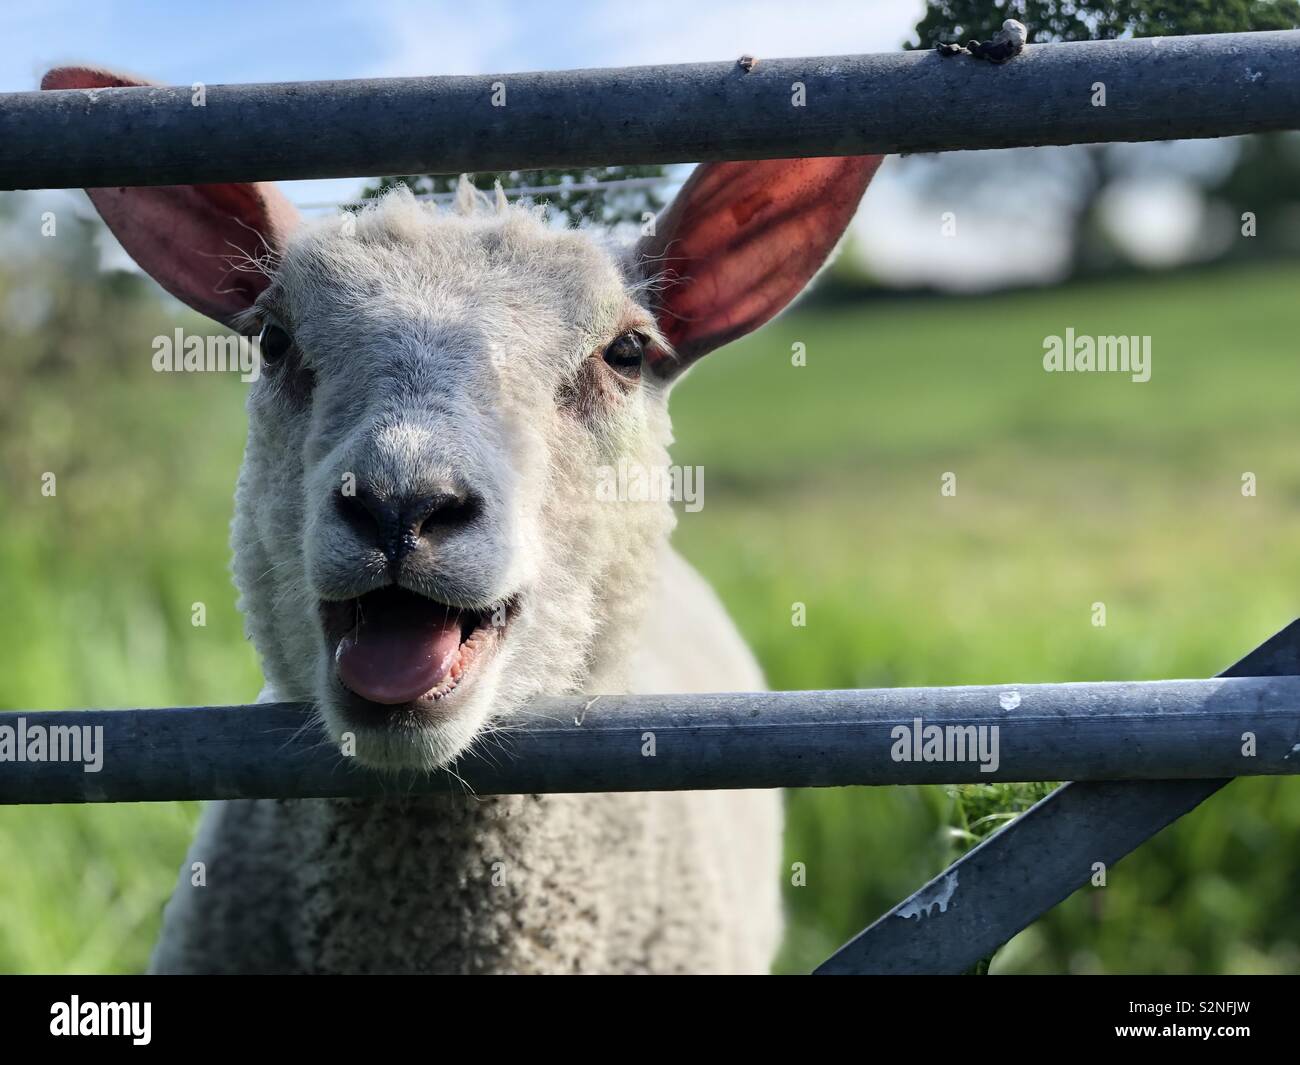 A lamb baa baa in a fence on a field in the countryside Stock Photo